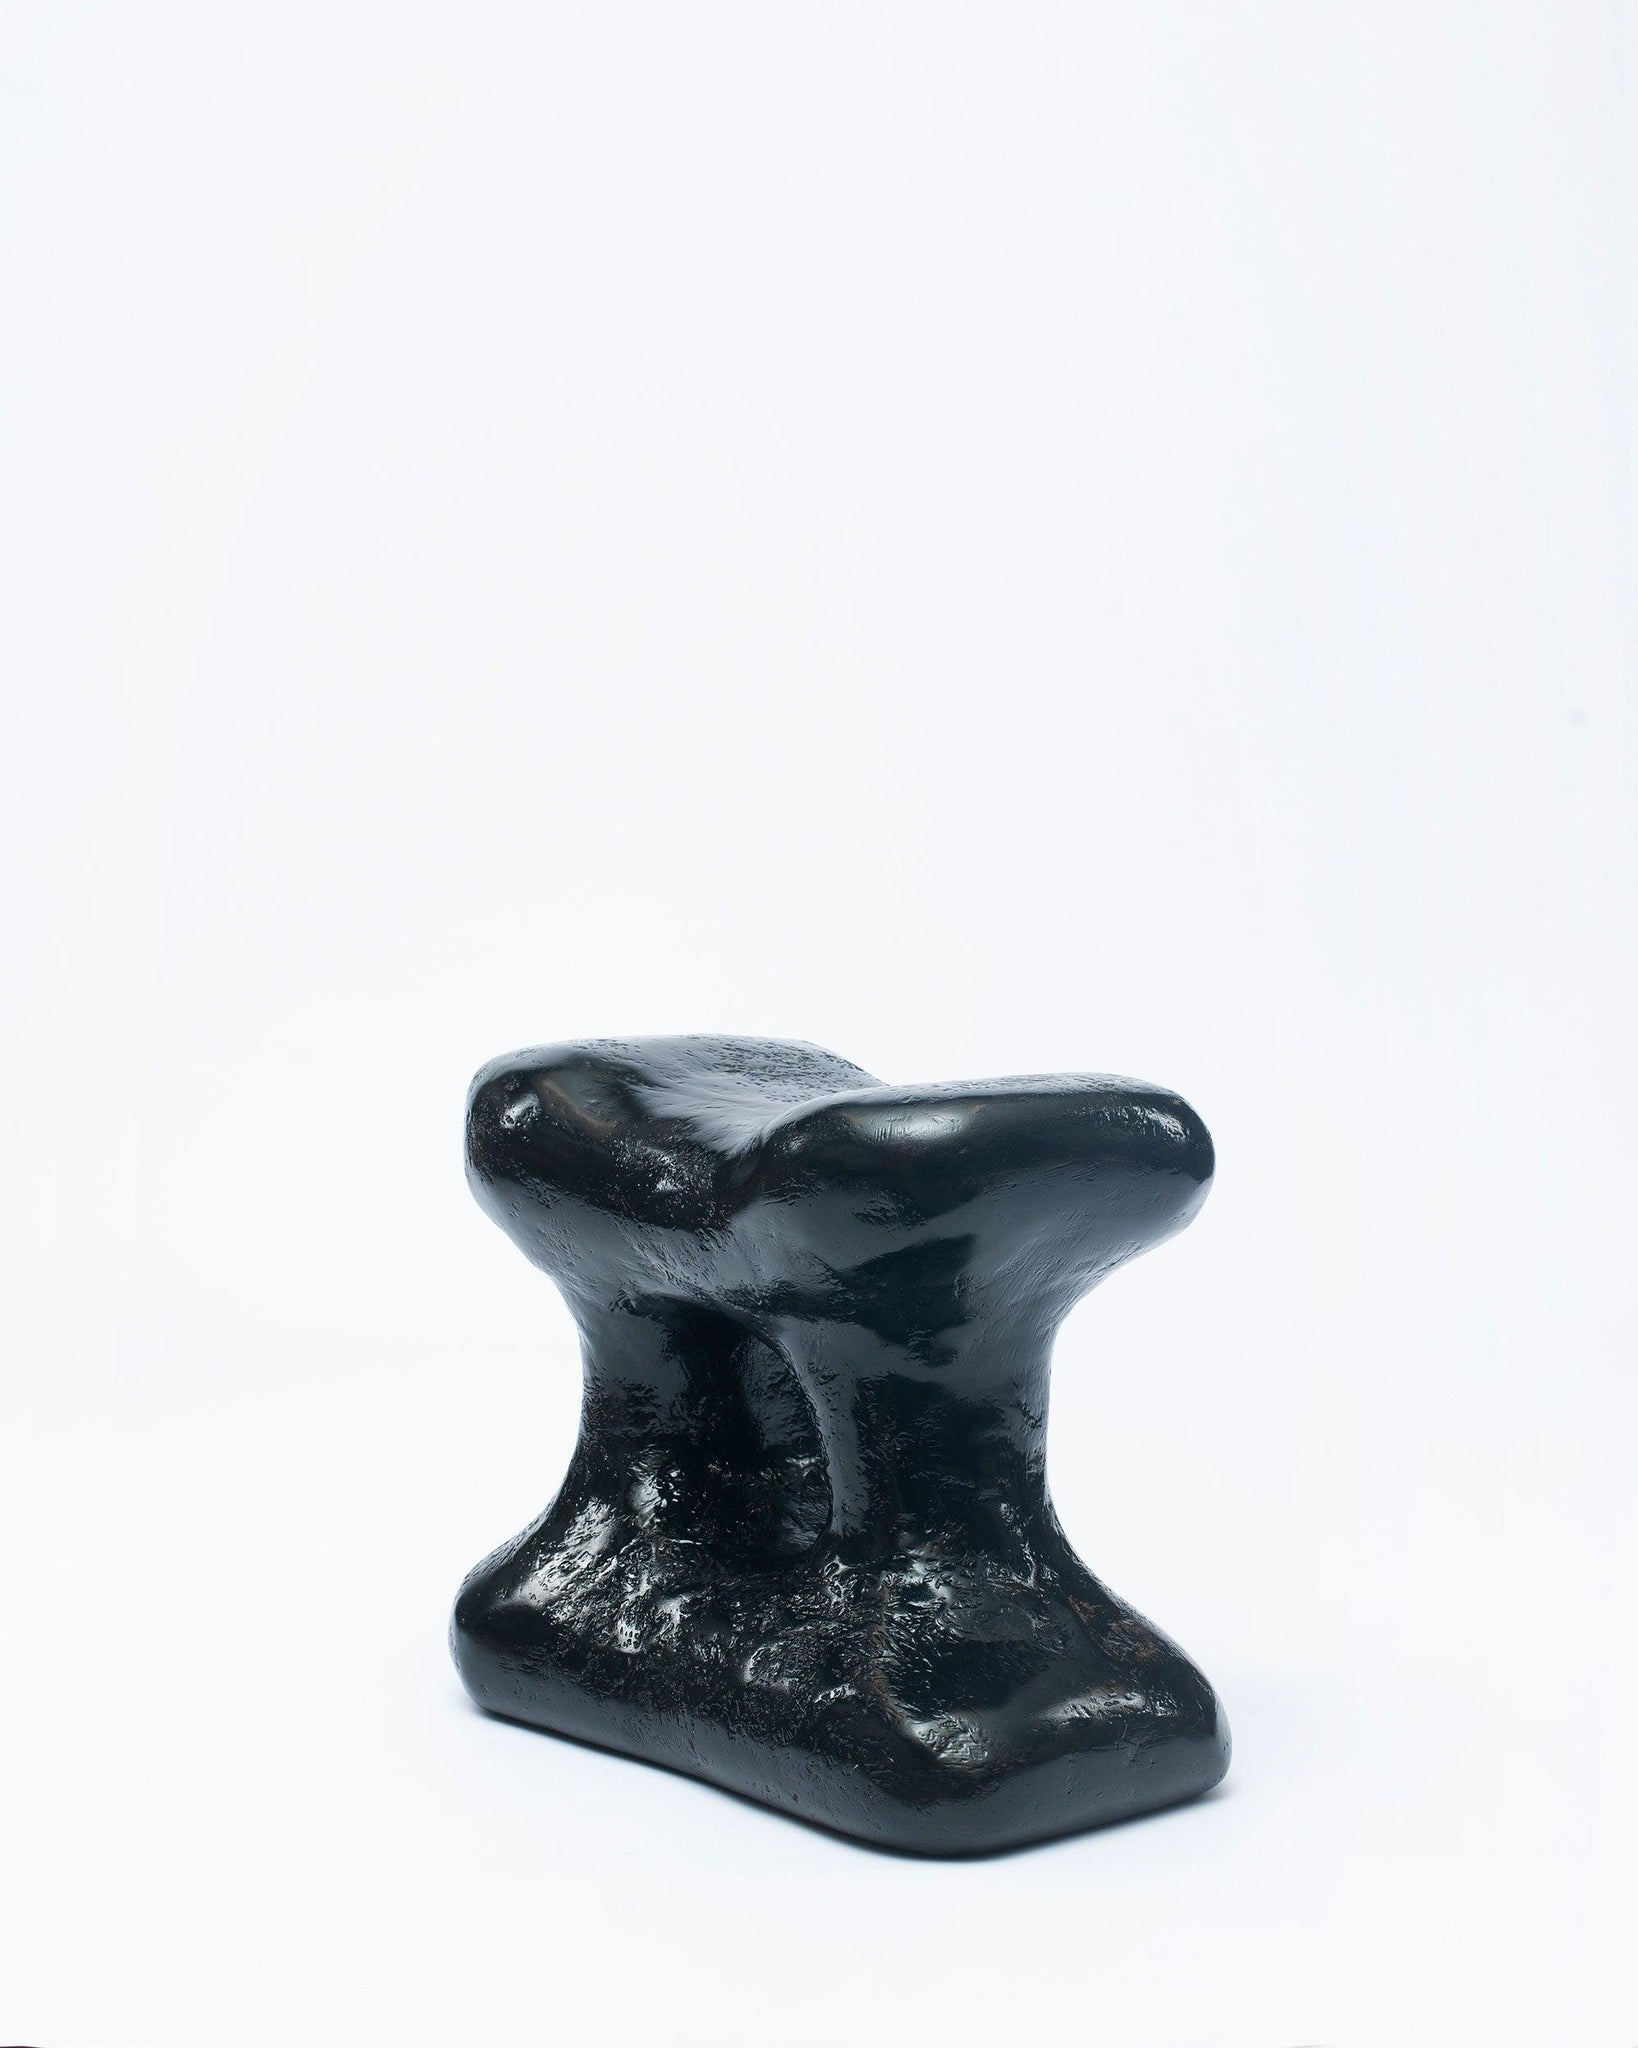 Hand-carved collectible black stool by NIKO JUNE in white background leaning to the right